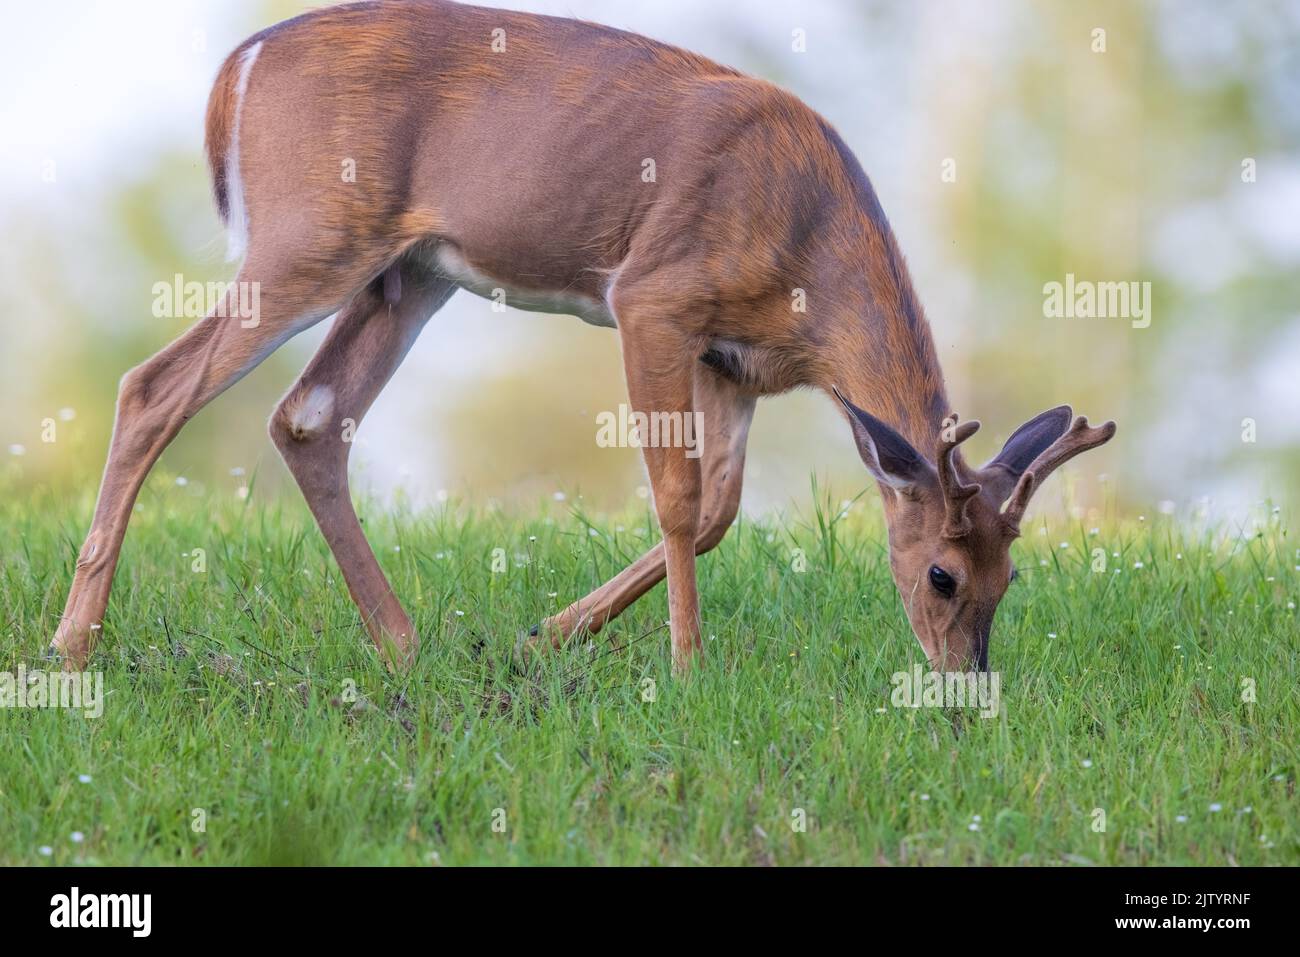 Young white-tailed buck in a northern Wisconsin field. Stock Photo